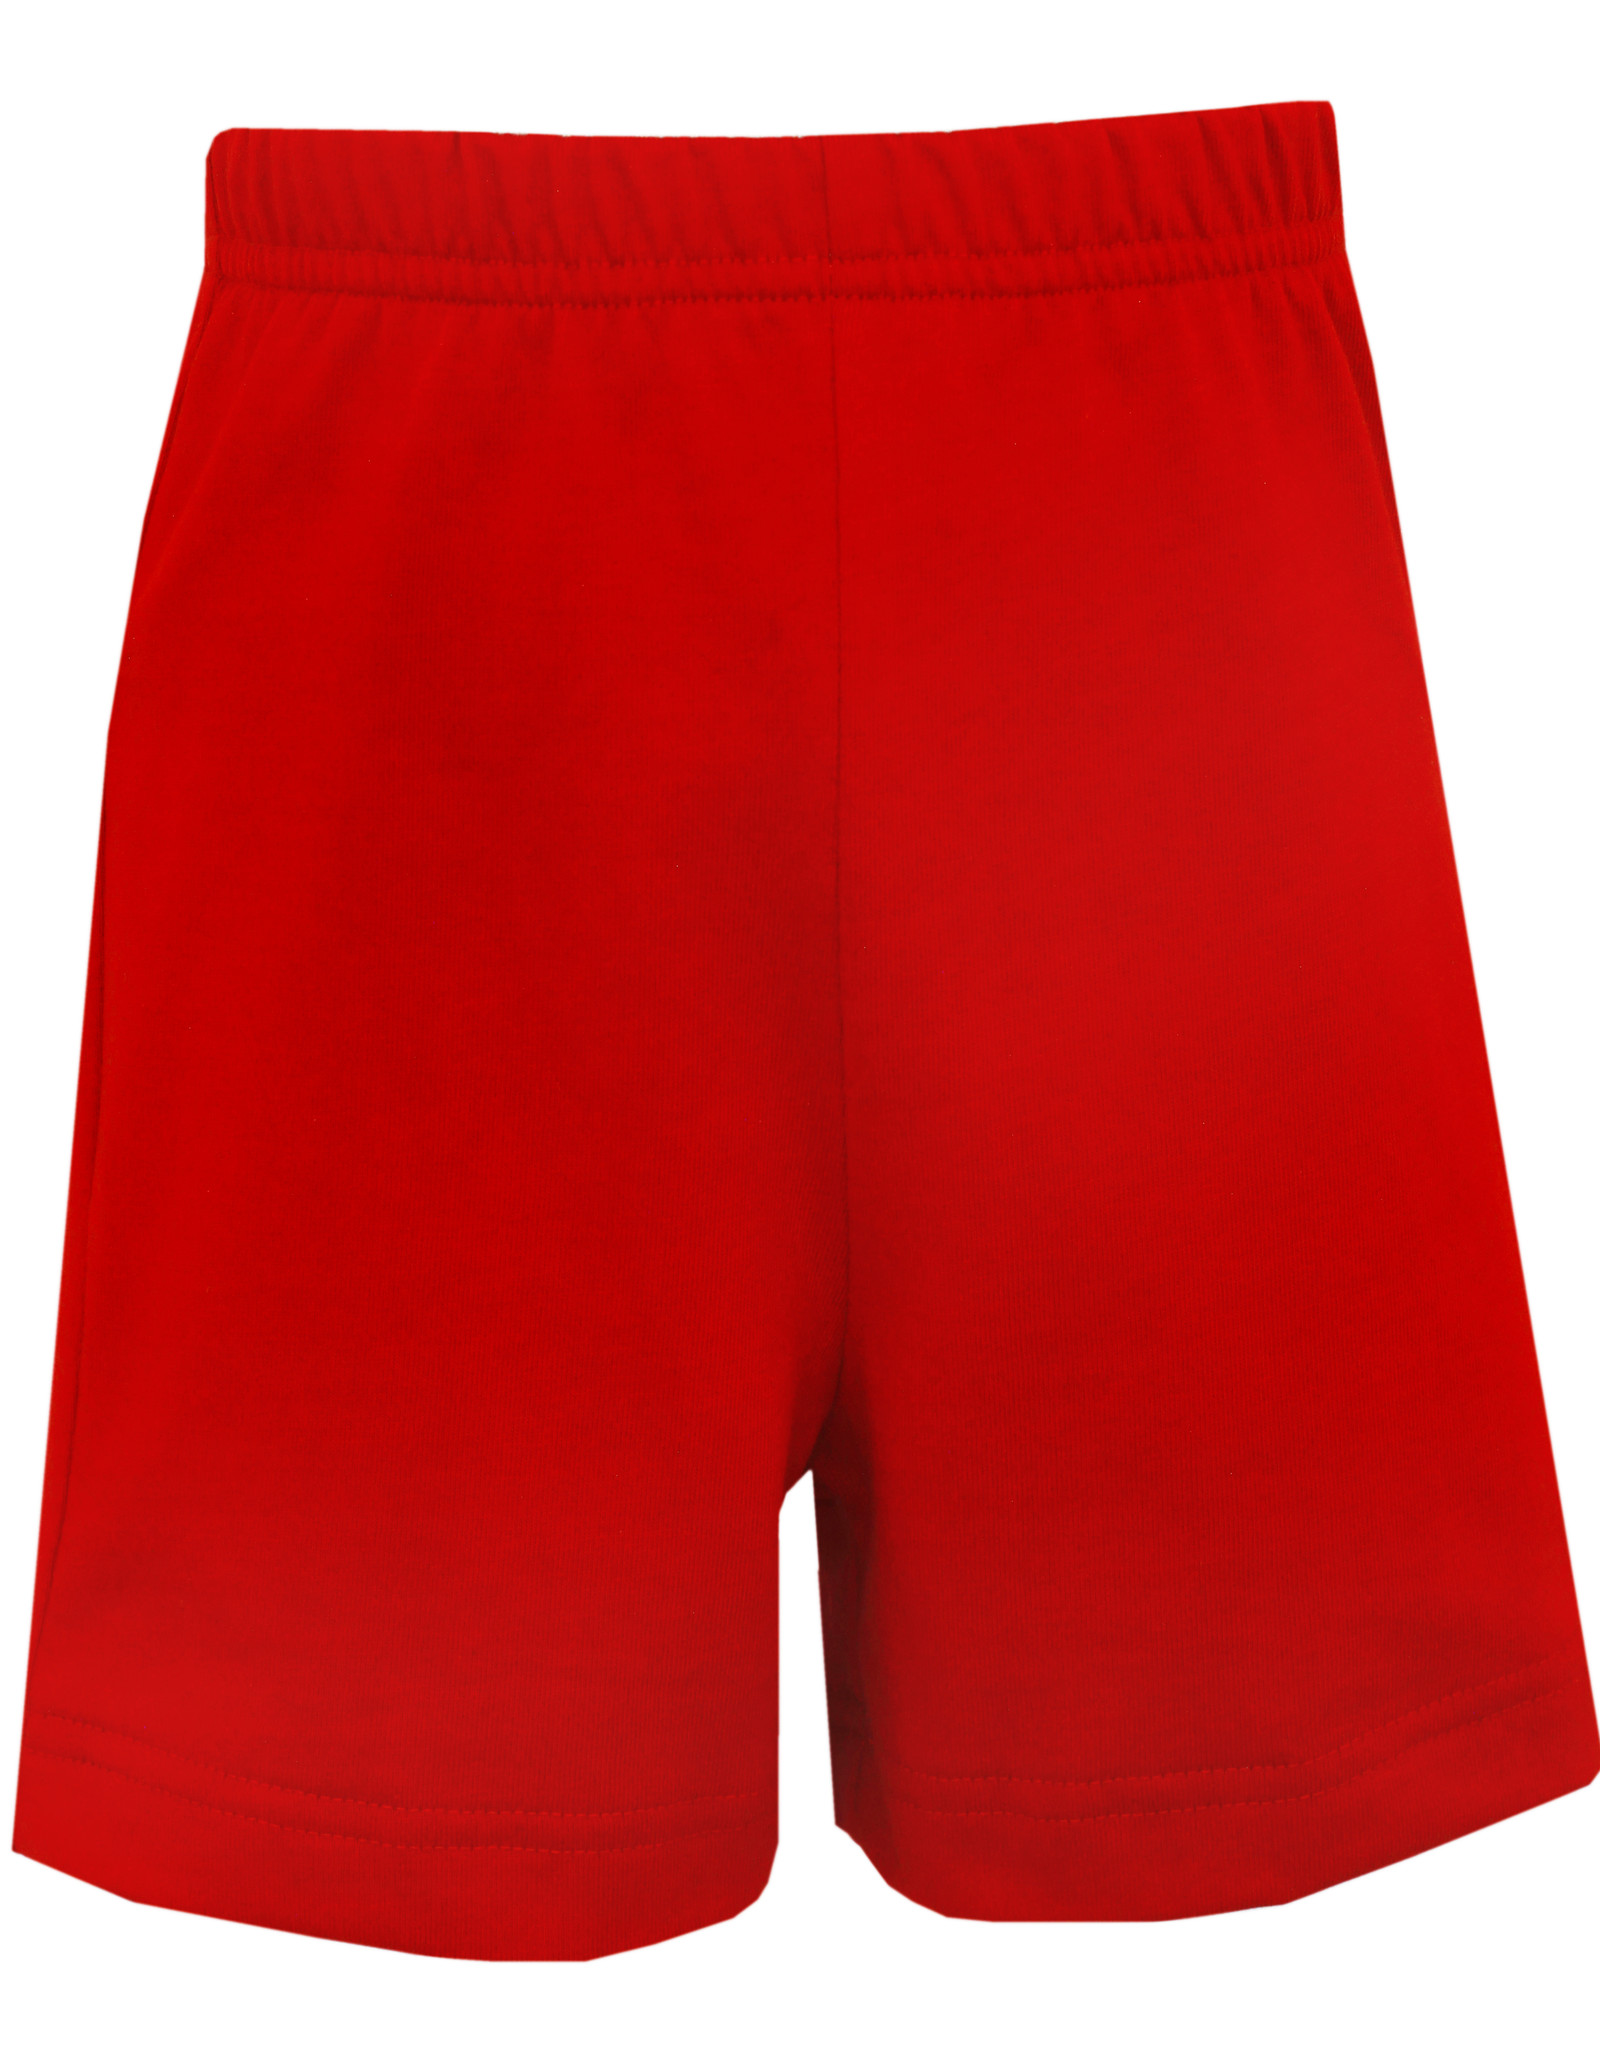 Claire and Charlie Red Knit Shorts